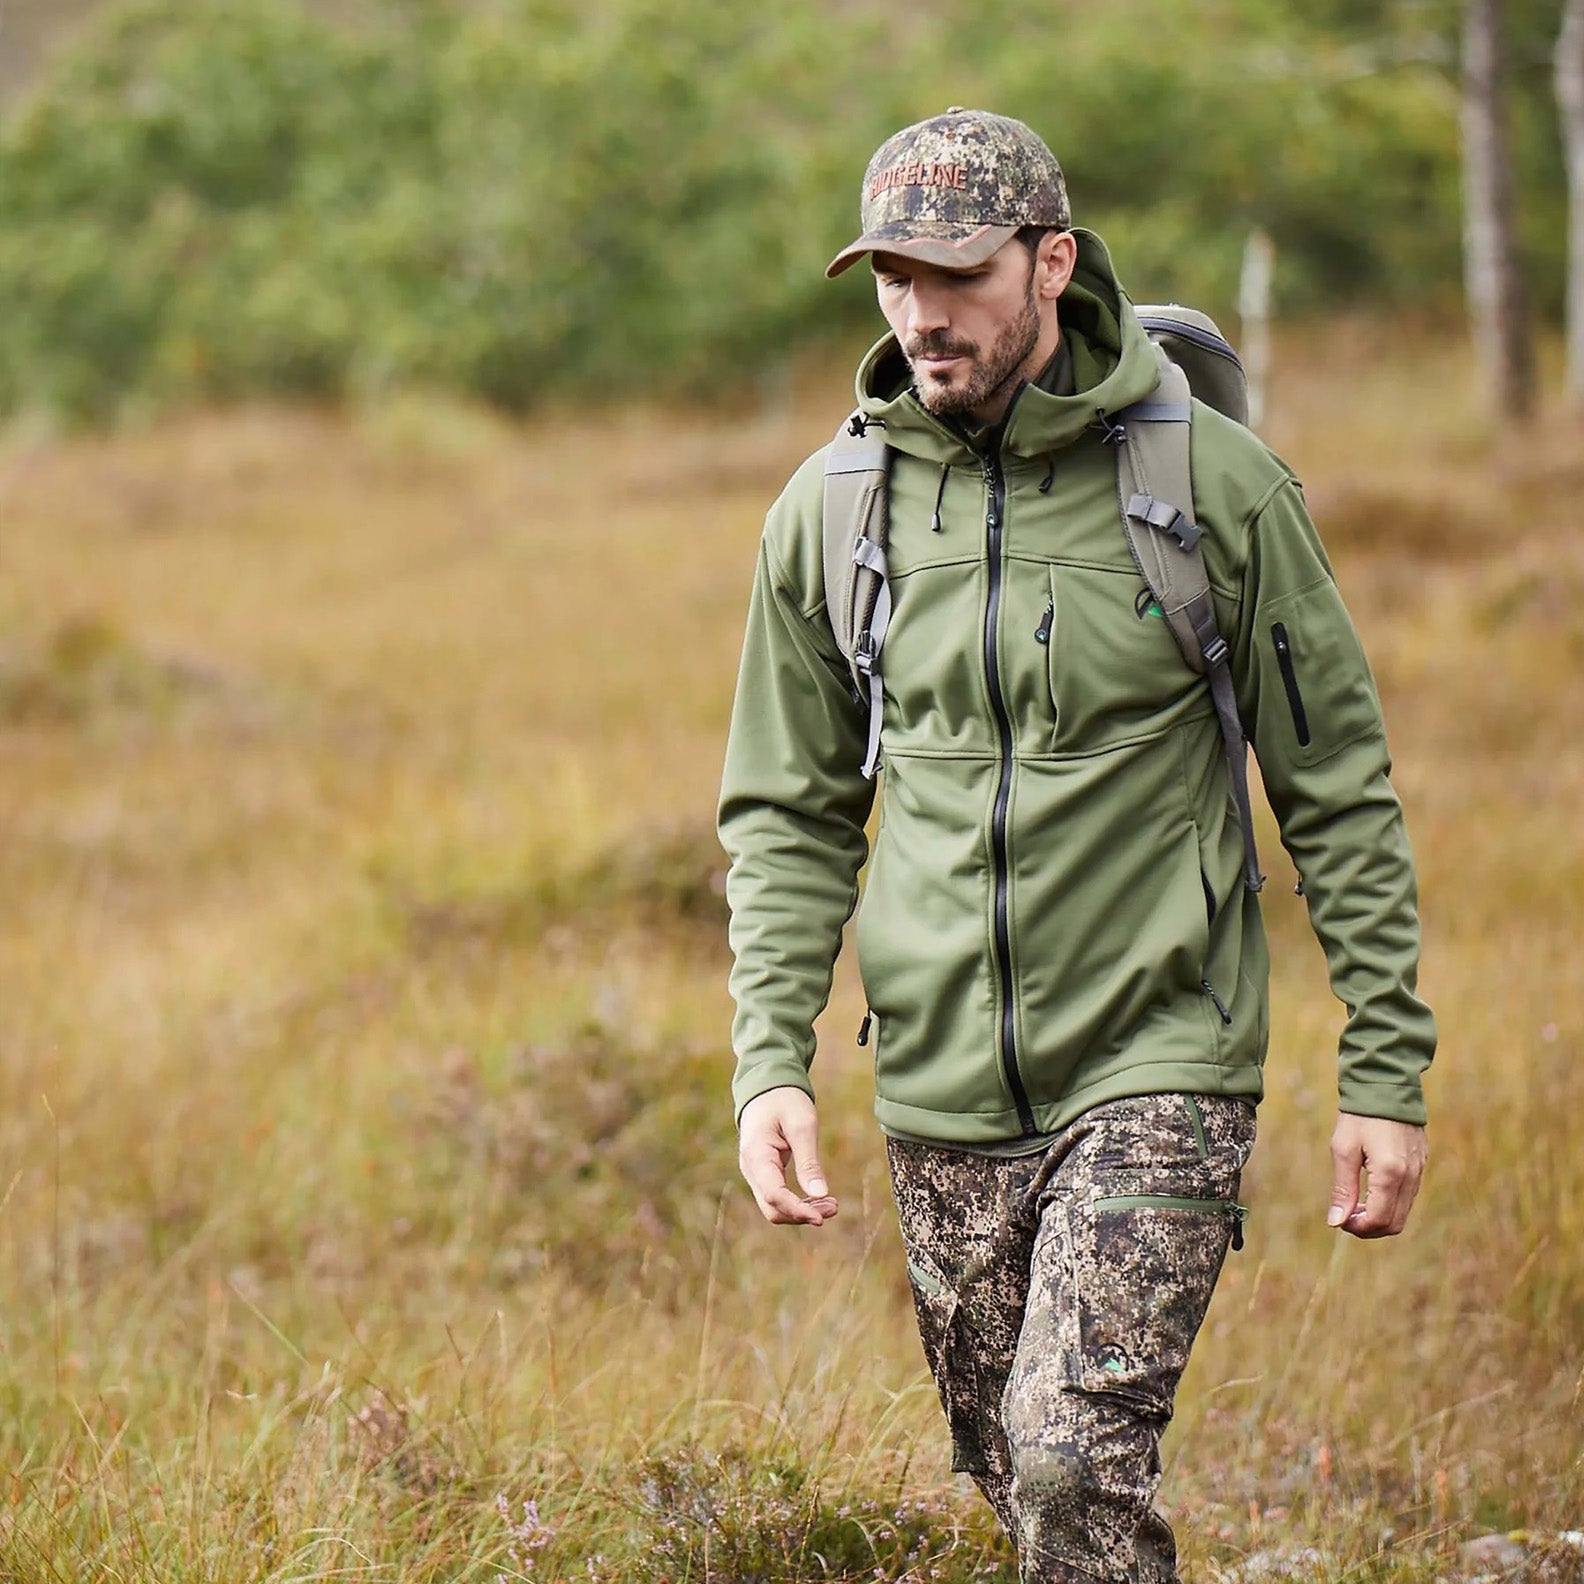 Tactical Softshell Jacket With Shoulder Flaps - Woodland Camo at Rs 2999.00  | Soft Shell Jacket | ID: 27527808012